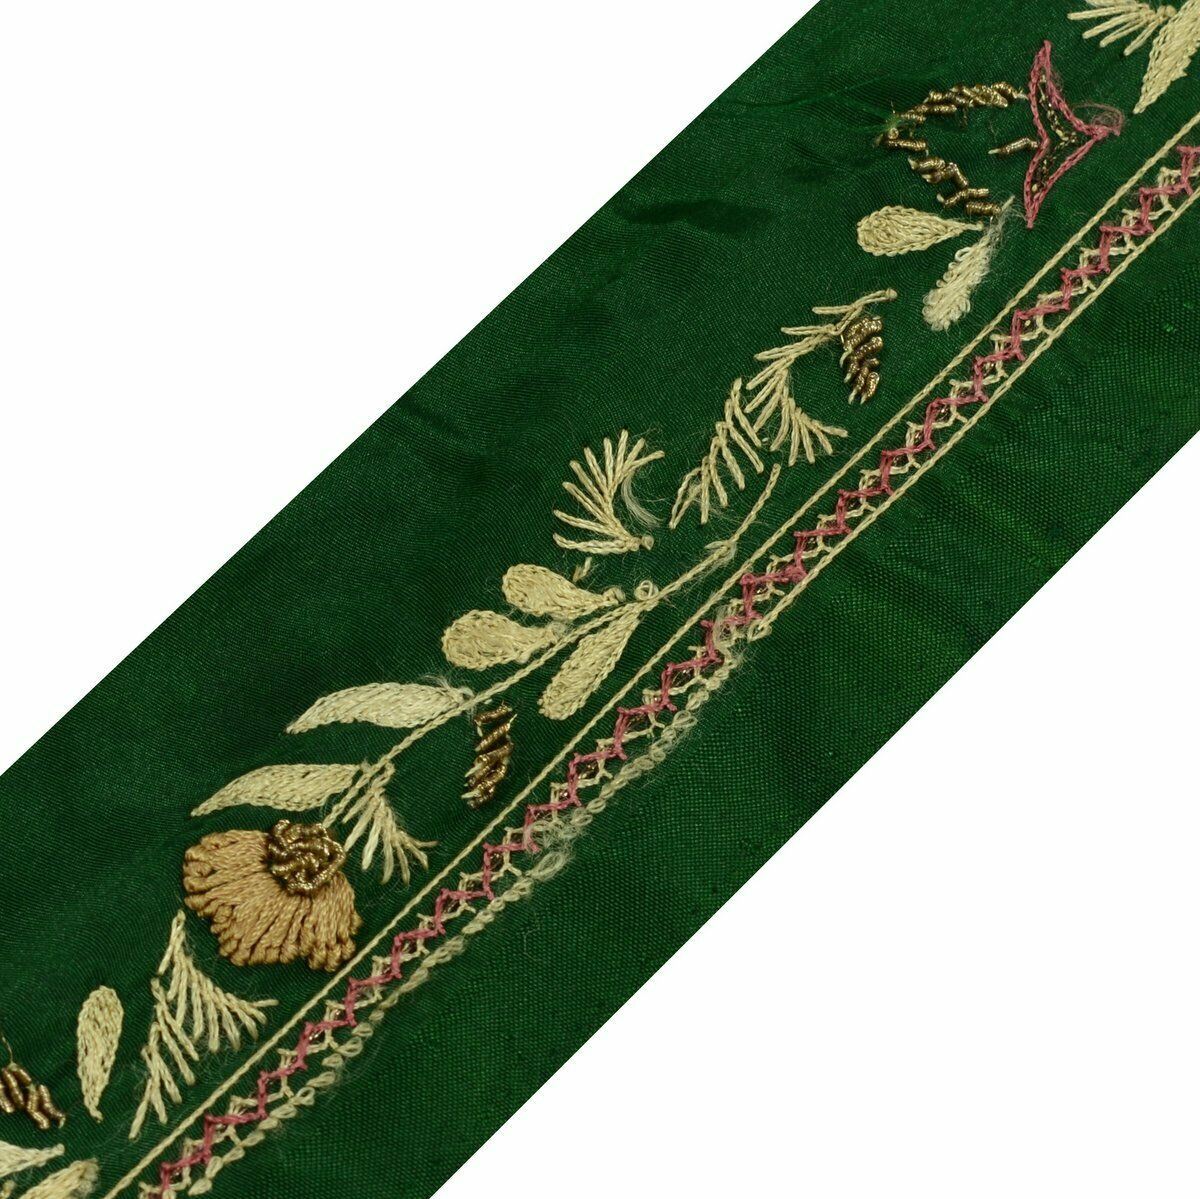 Vintage Saree Border Craft Trim Lace Hand Embroidered Beaded Green Riboon